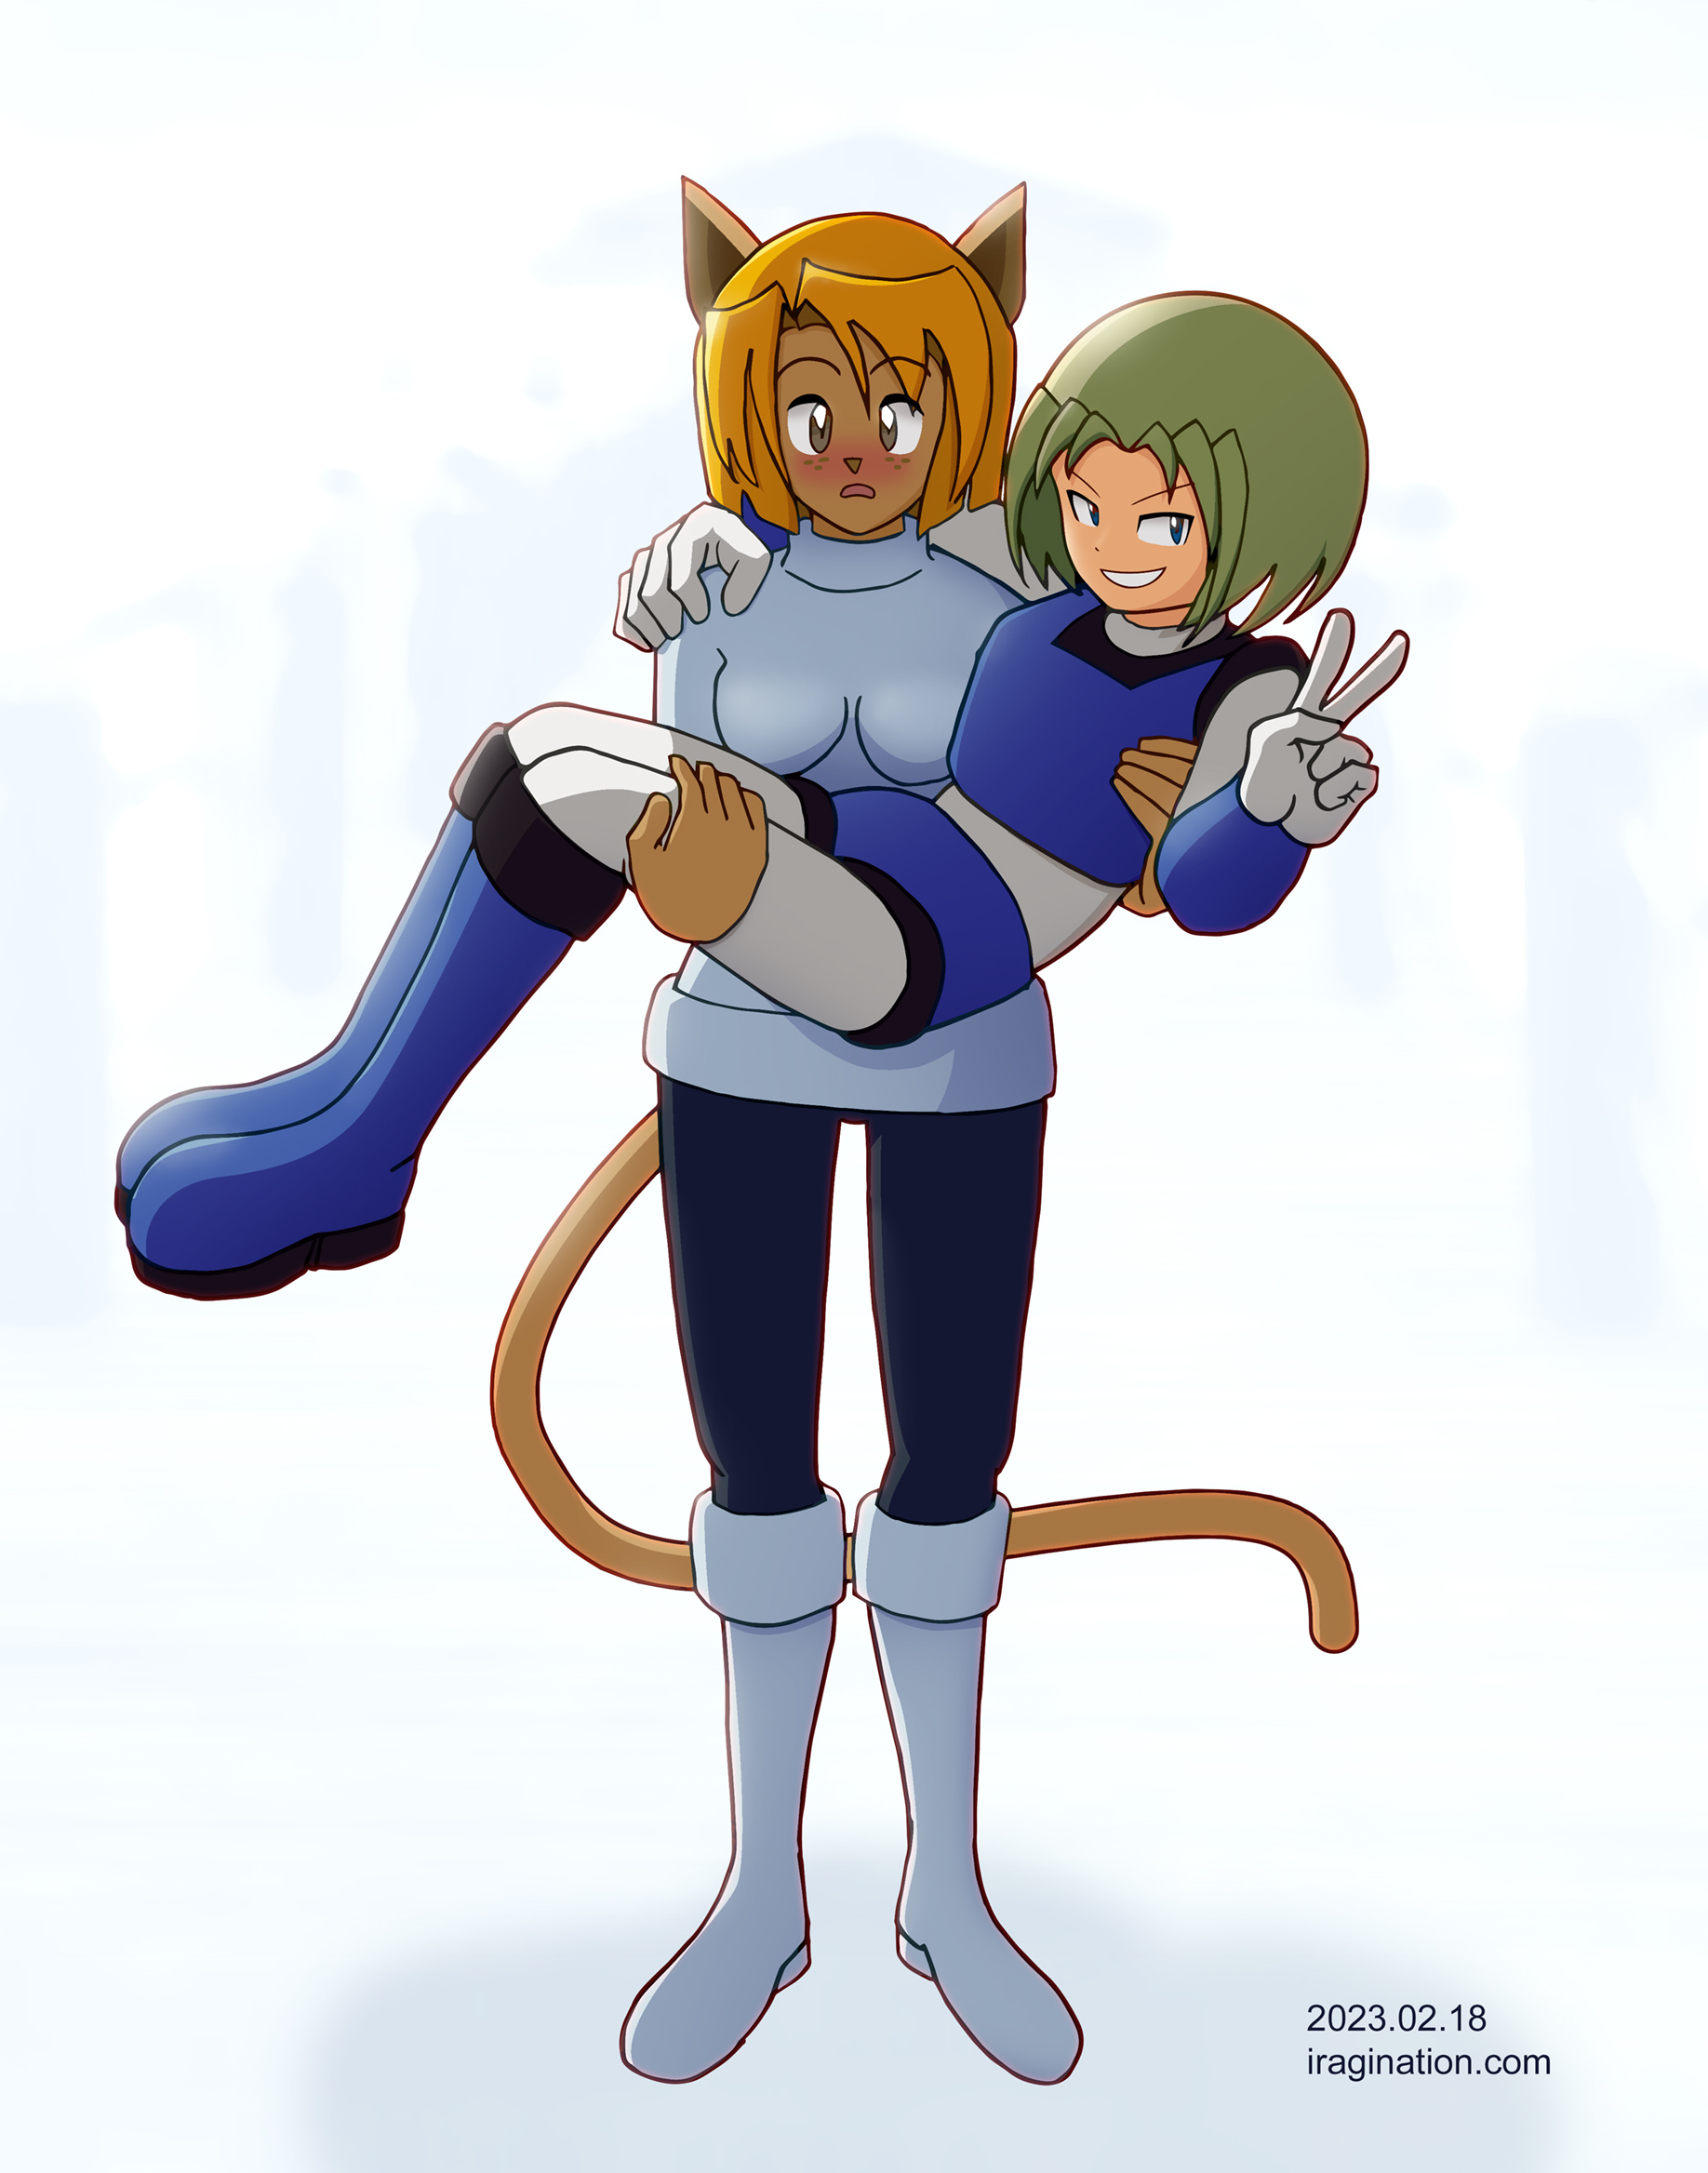 Delia and Leika - Valentine 2023
This came out while I was doodling for Valentine's ideas and as an exercise for drawing characters together. As usual, I don’t know why Leika looks startled and how she got to princess carry Delia in the first place. Delia does not seem bothered about it and is actually quite happy to have this memory.

Delia and Leika © IRAGINATION
Keywords: delia leika